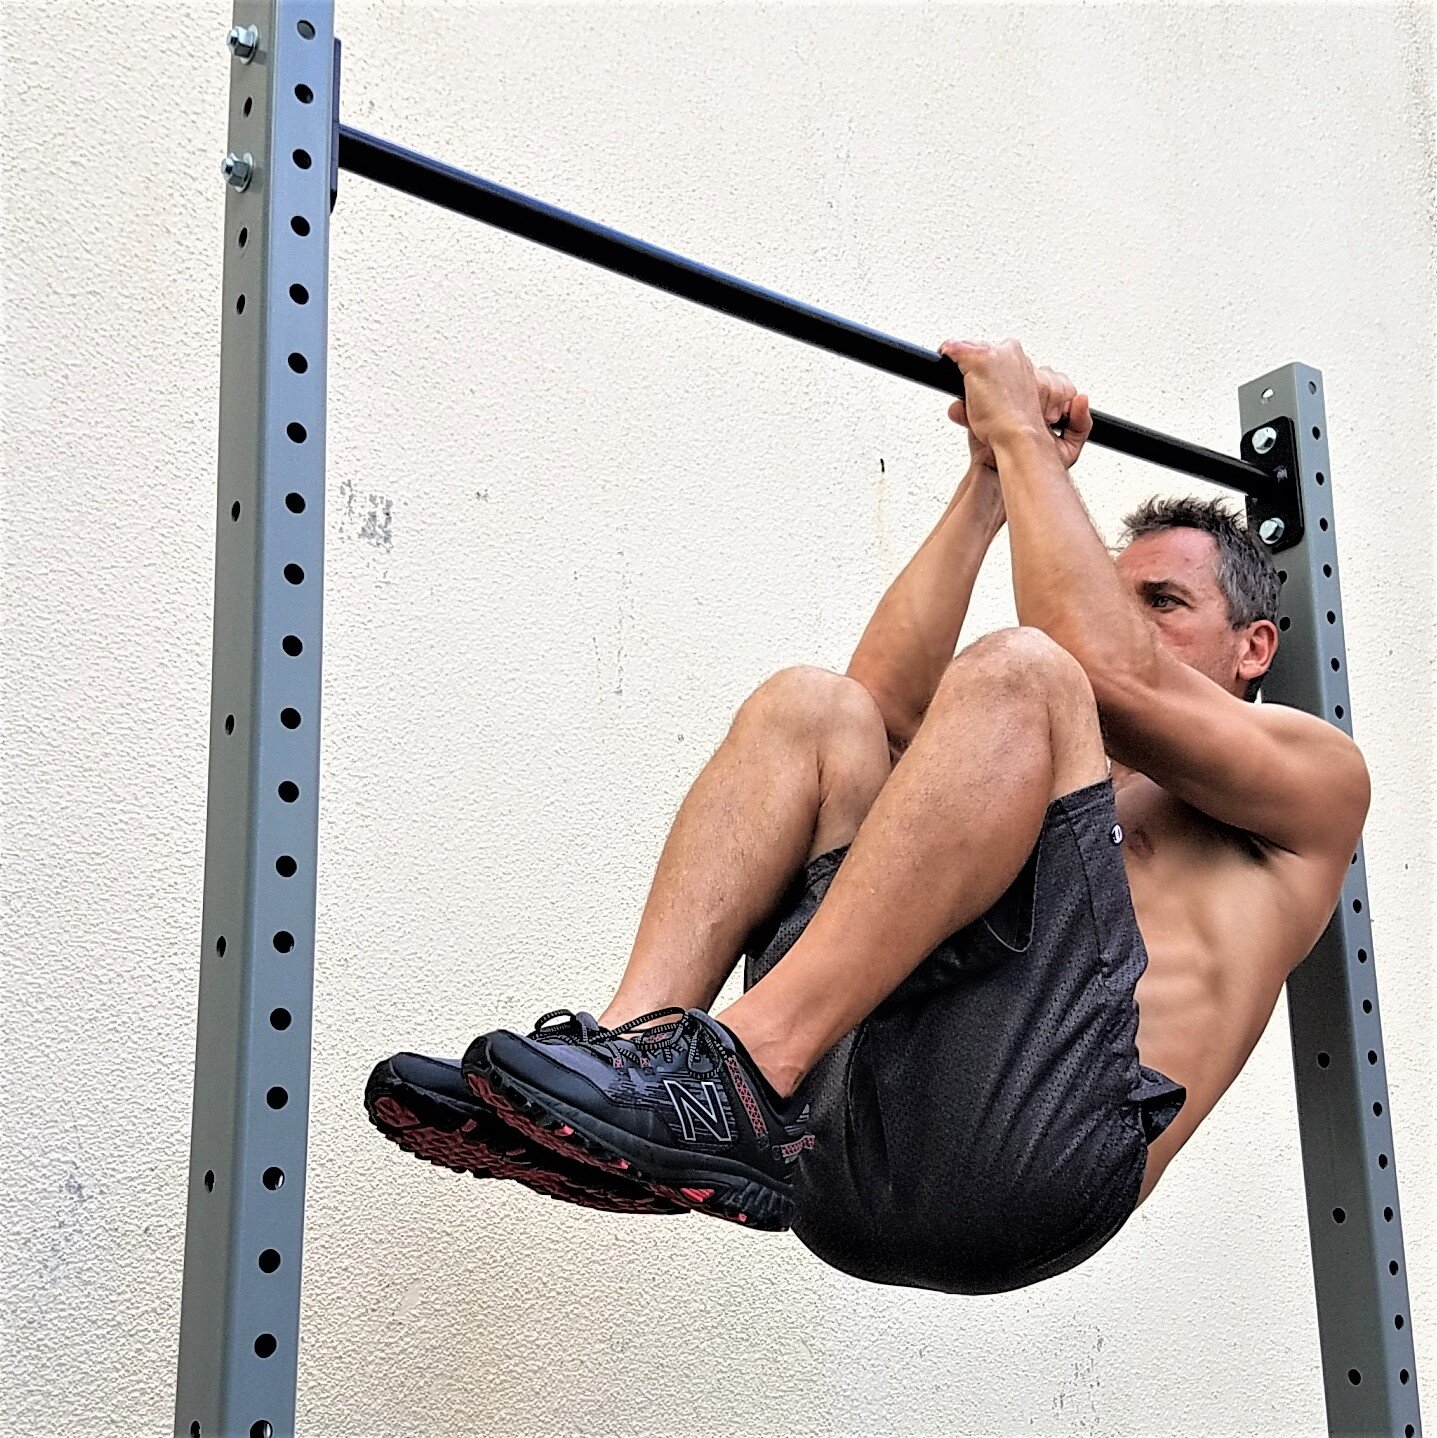 ACFT Pull Up Bar - FitBar Grip, Obstacle, Strength Equipment